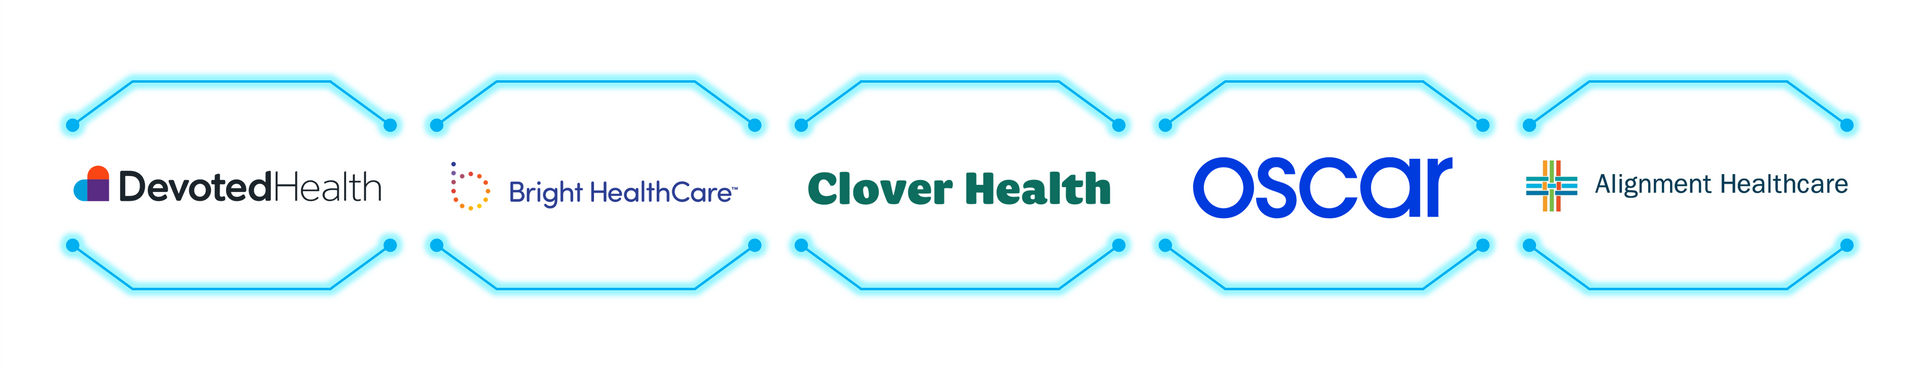 A list of tech-enabled insurers, with logos from Devoted Health, Bright HealthCare, Clover Health, Oscar, and Alignment Healthcare